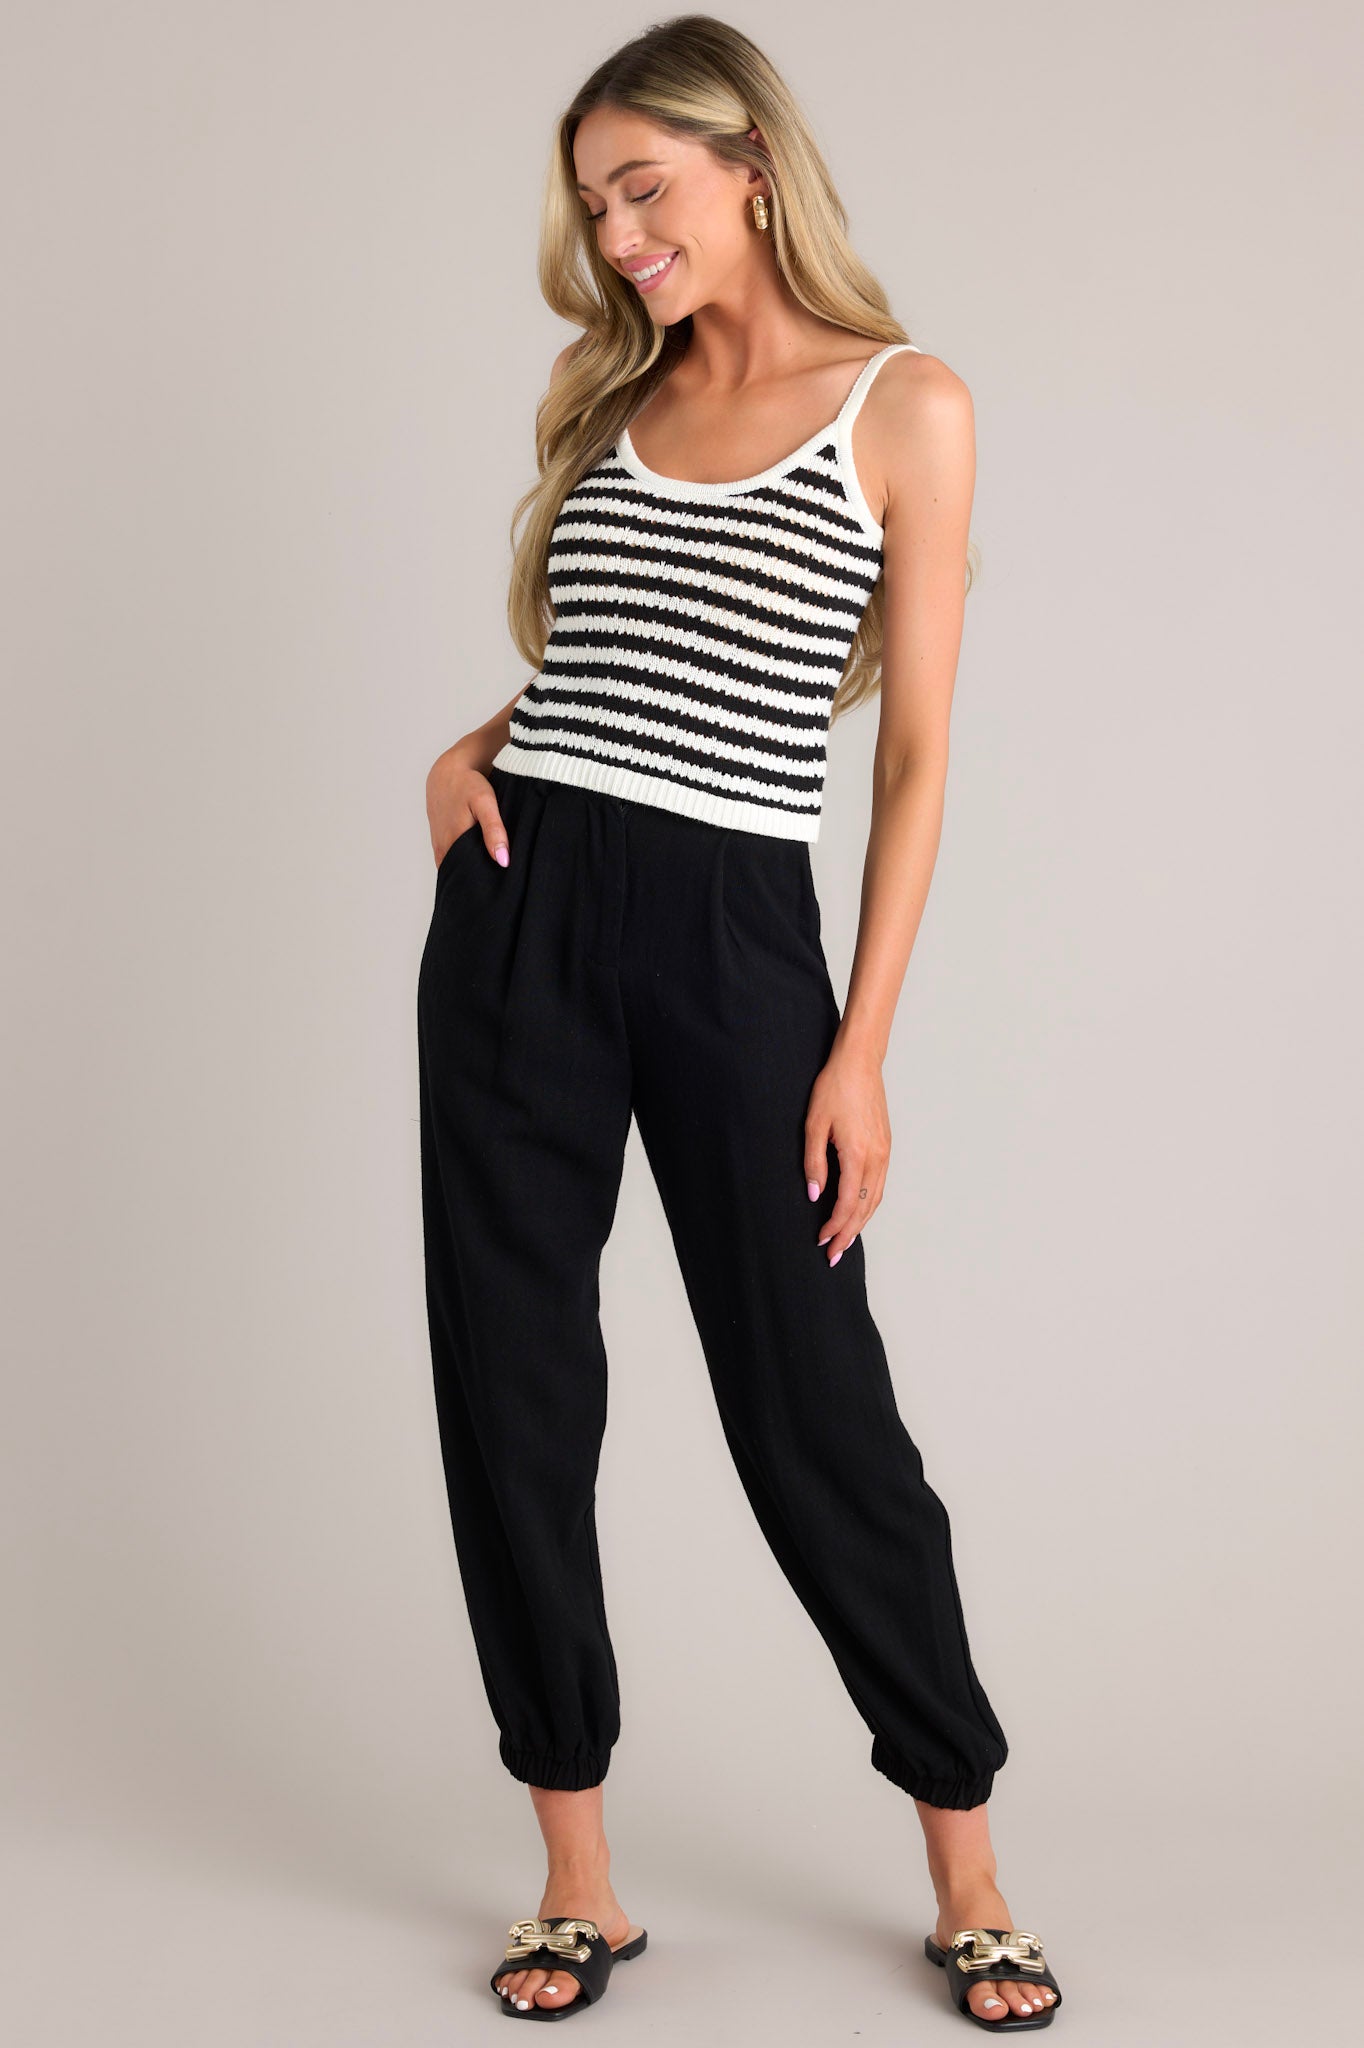 Angled Full length view of a black stripe tank featuring a scoop neckline, thin straps, a striped pattern, a lightweight knit material, and a slightly cropped hemline